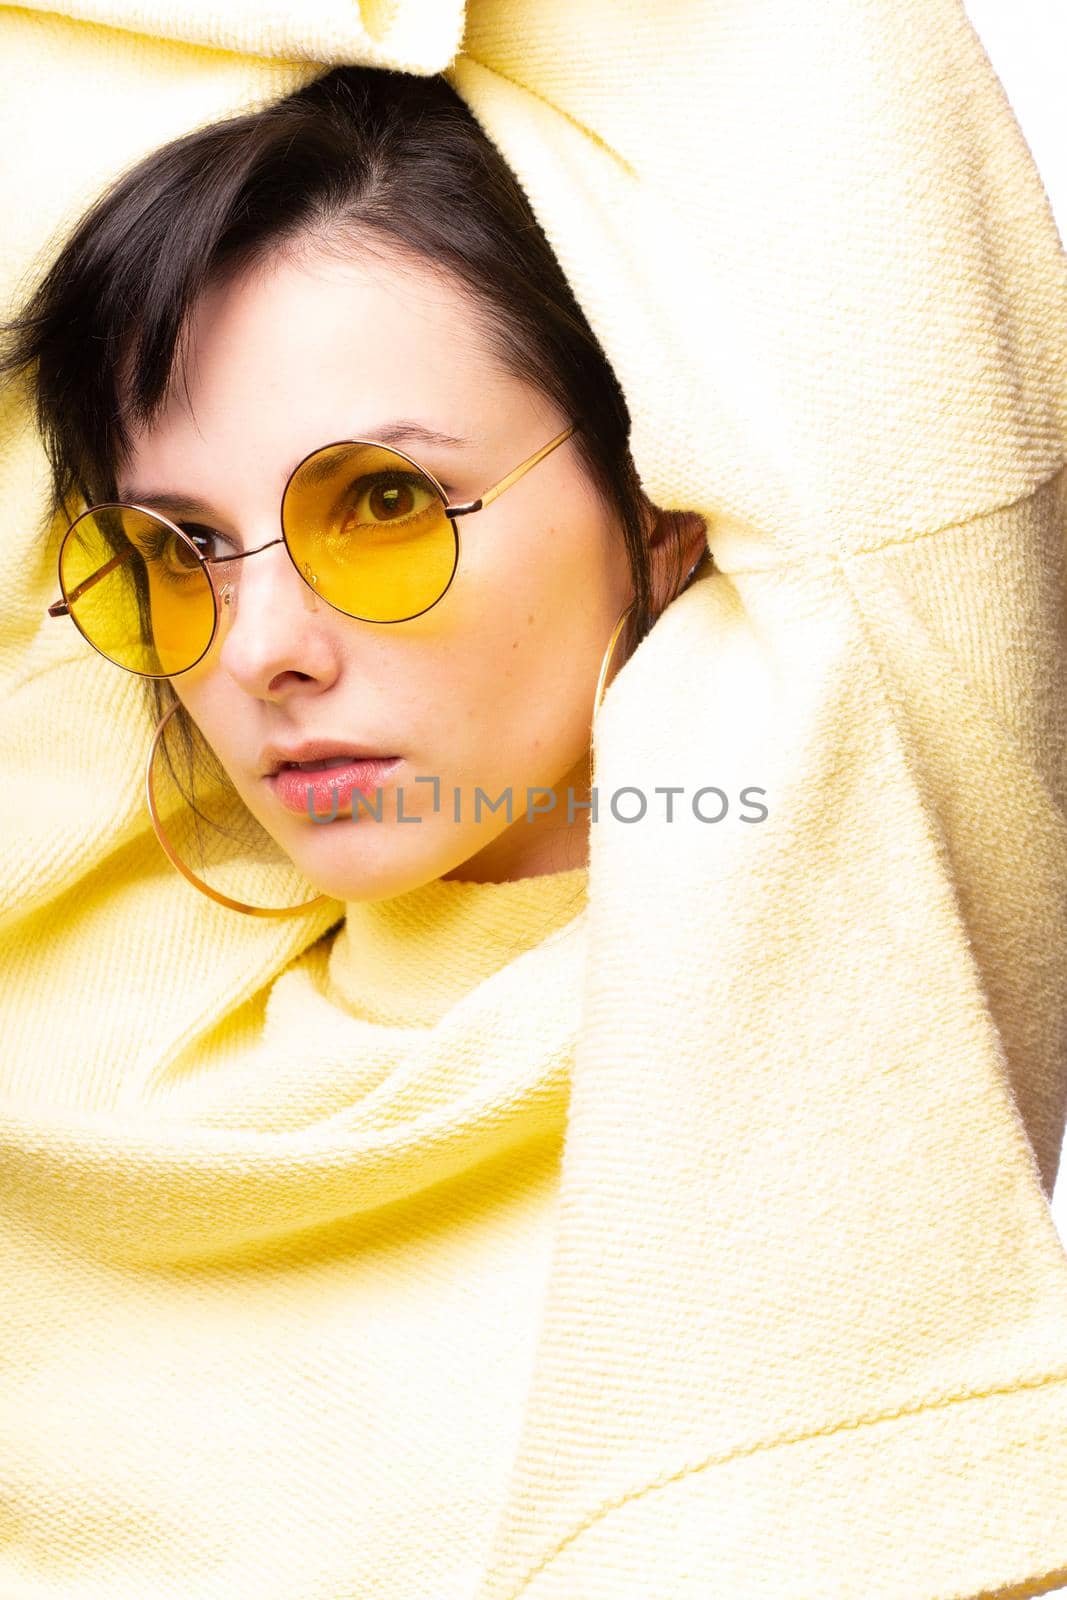 brunette woman in yellow glasses and yellow sweater, close-up portrait, white background by shilovskaya